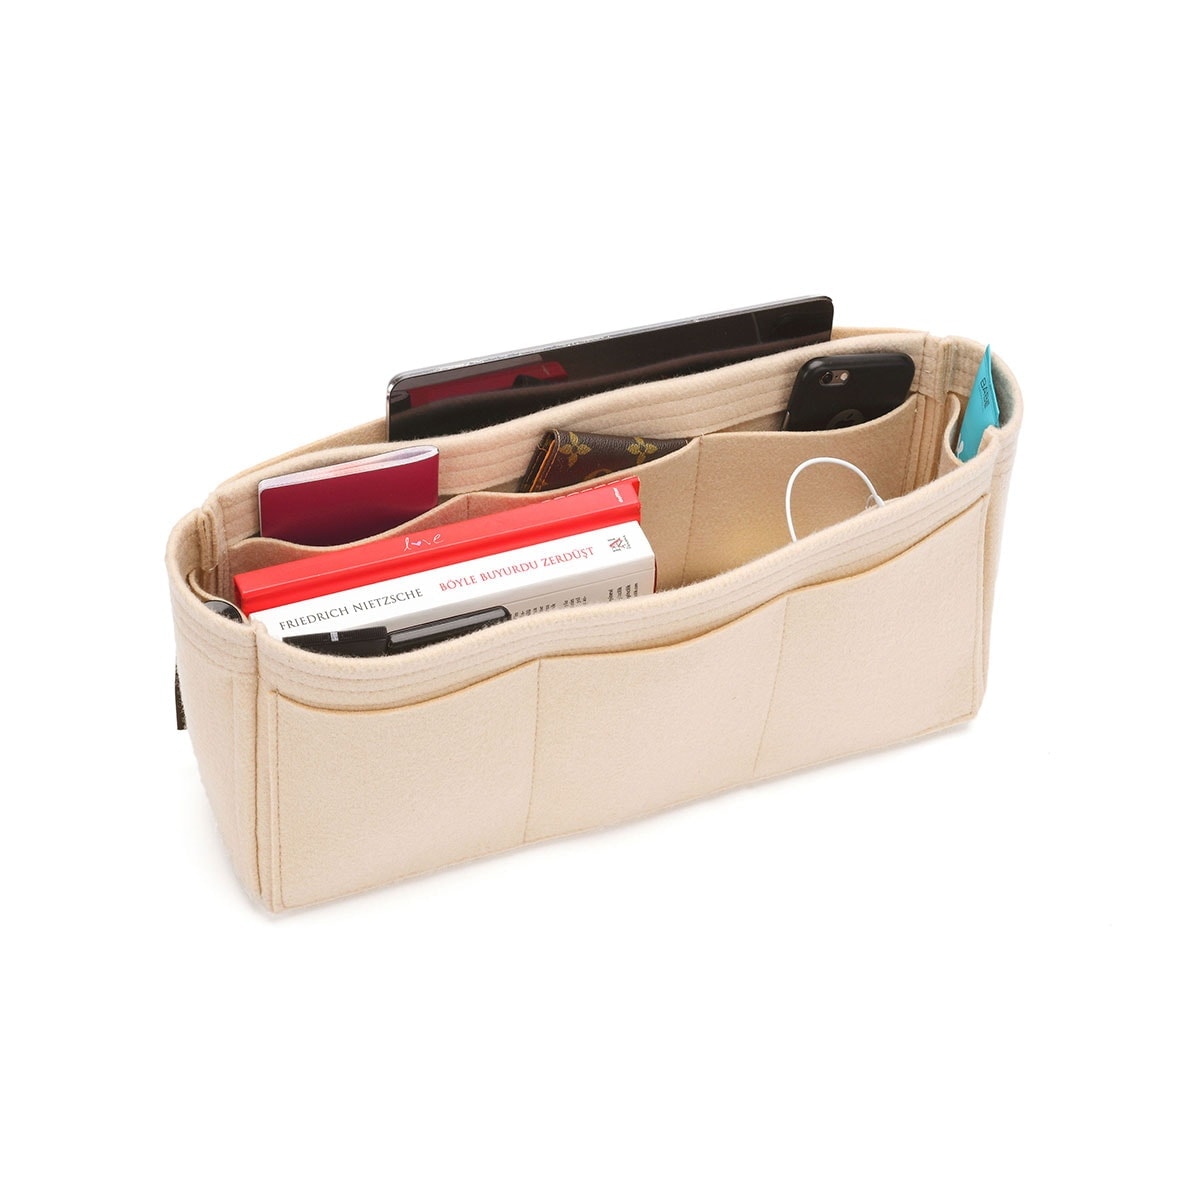 Bag and Purse Organizer with Basic Style for Hermes Herbag 31 and